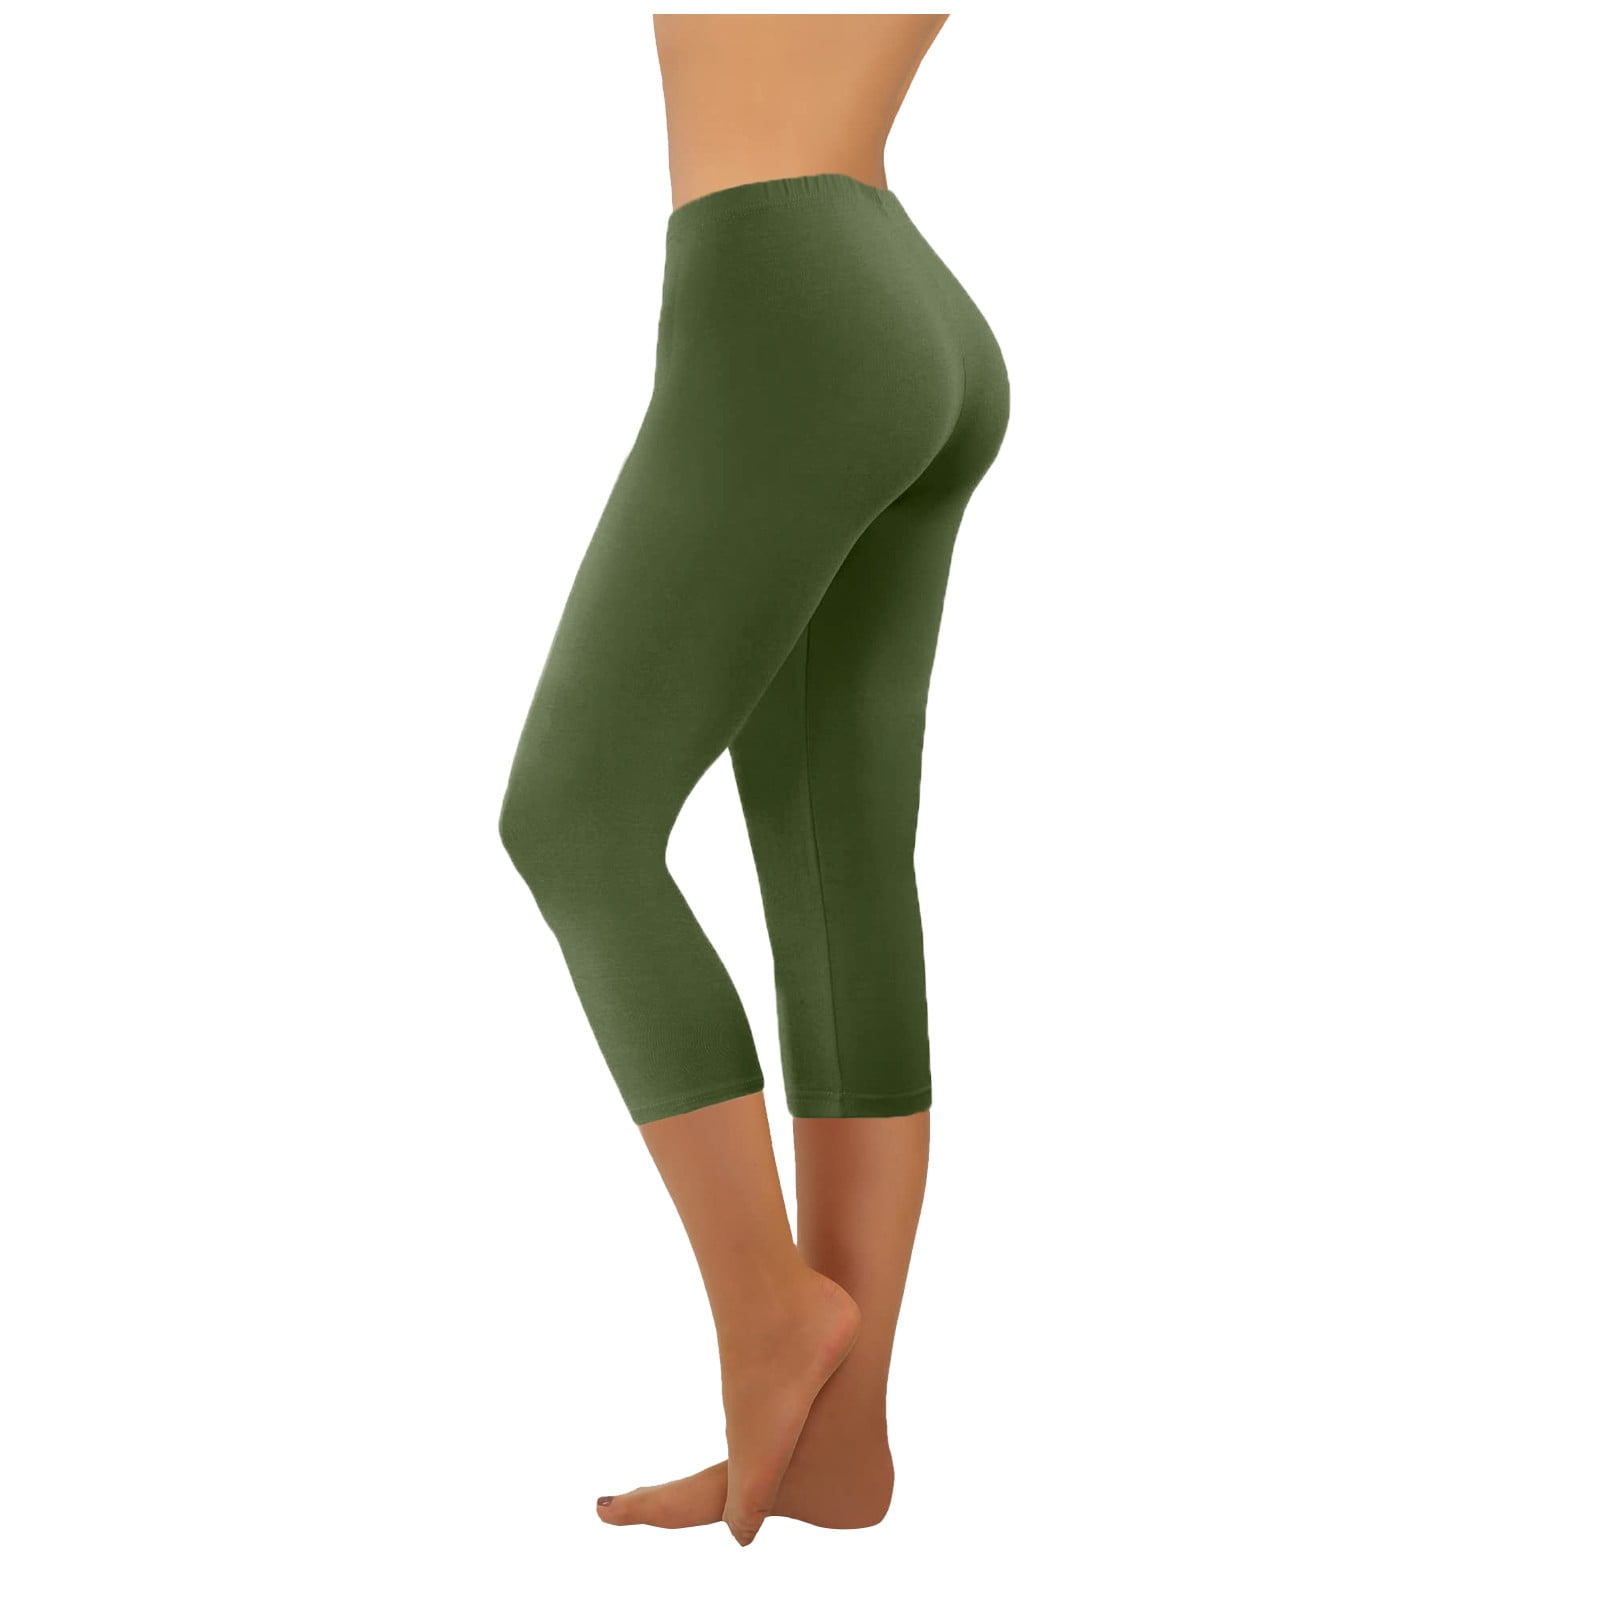 ZQGJB High Waisted Capri Leggings for Women - Soft Slim Tummy Control -  Solid Color Exercise Sknny Pants for Running Cycling Yoga Workout Trousers  Army Green M 